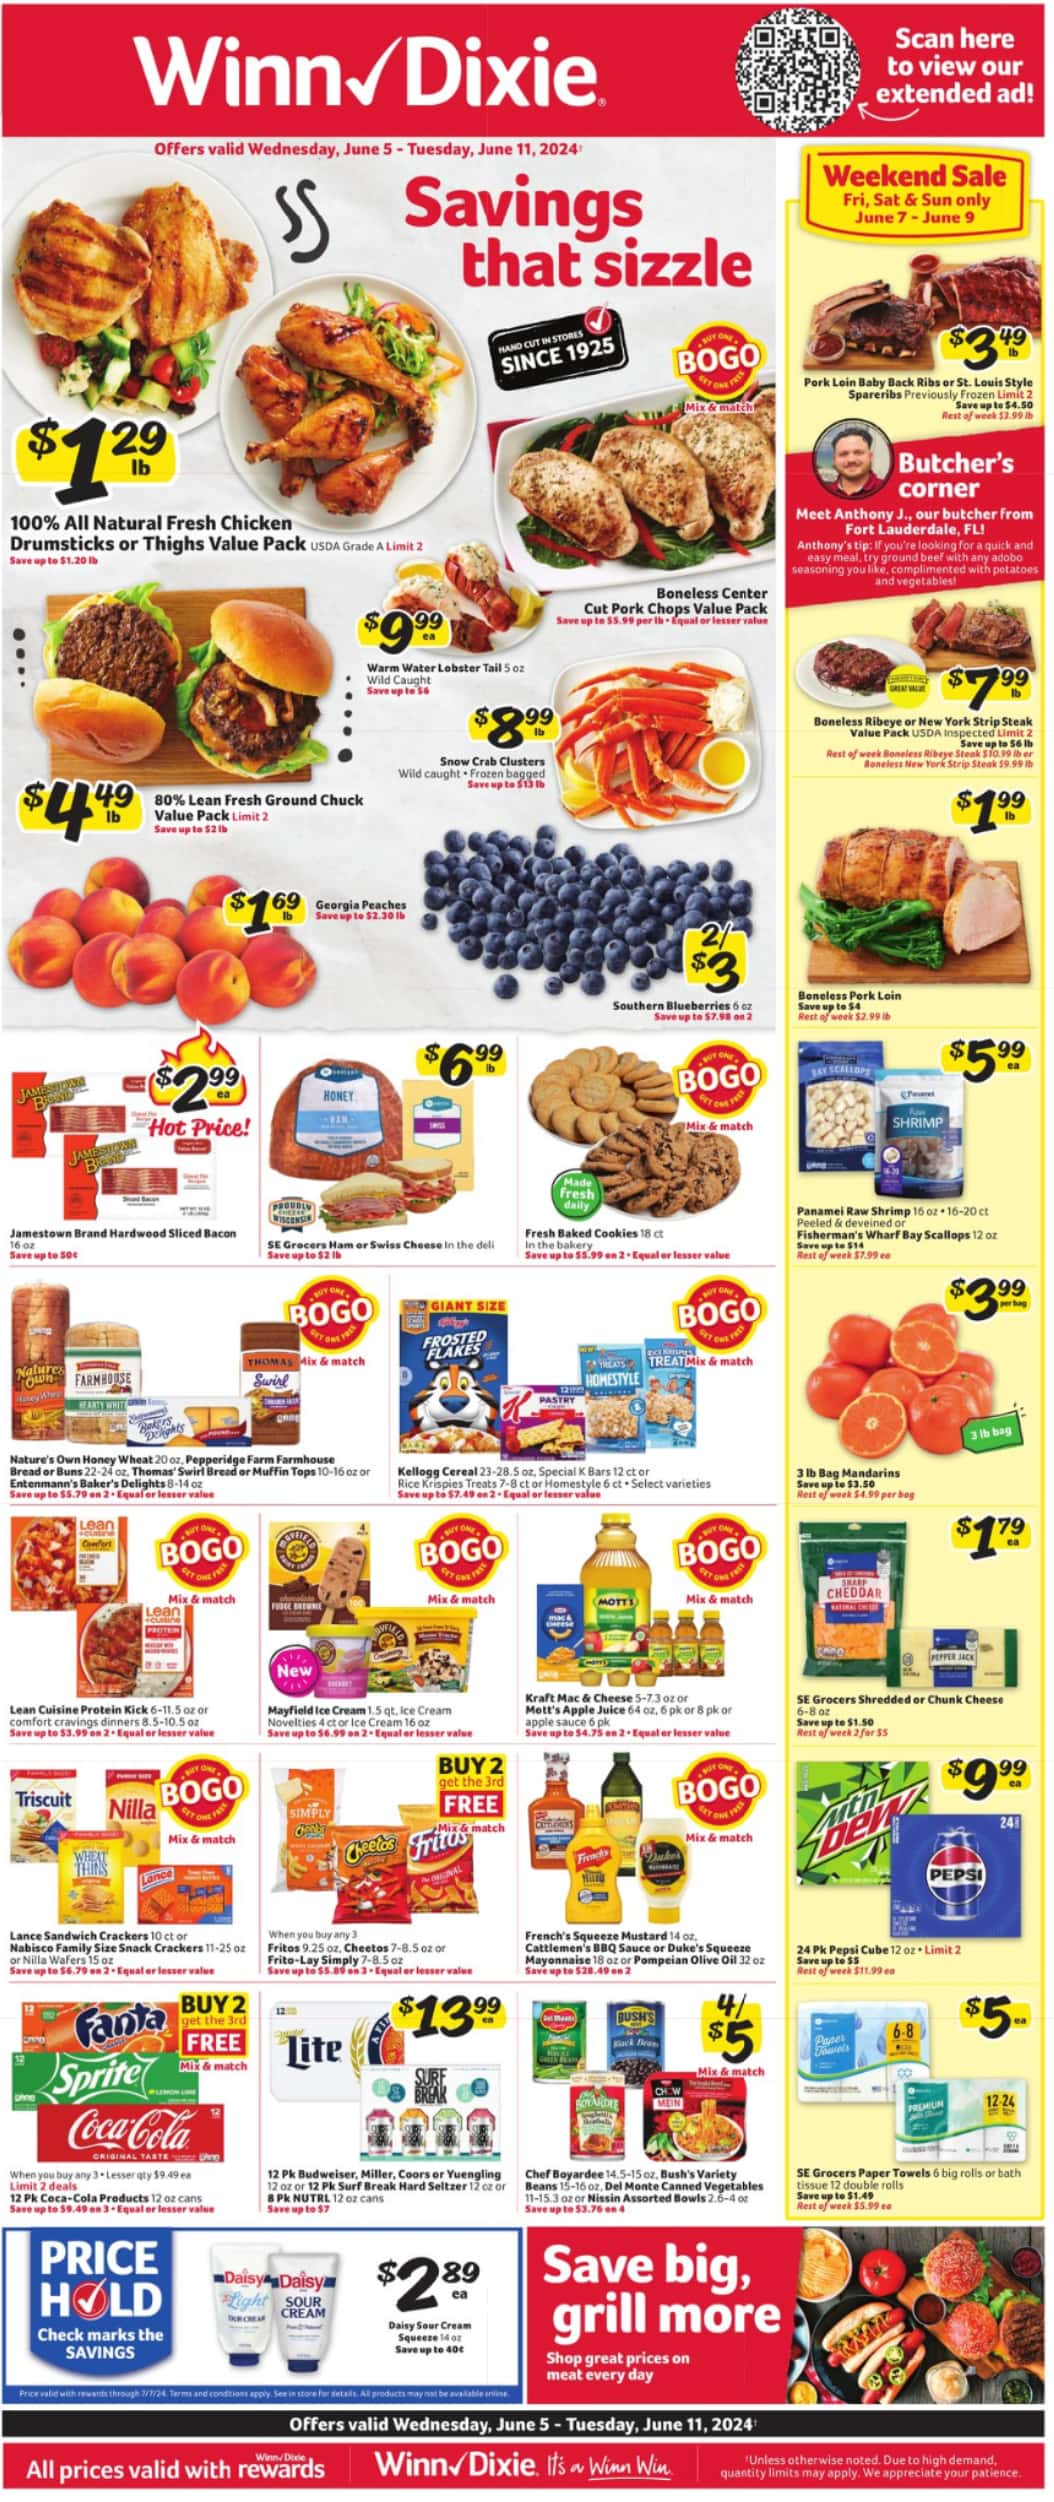 Winn Dixie July 2024 Weekly Sales, Deals, Discounts and Digital Coupons.